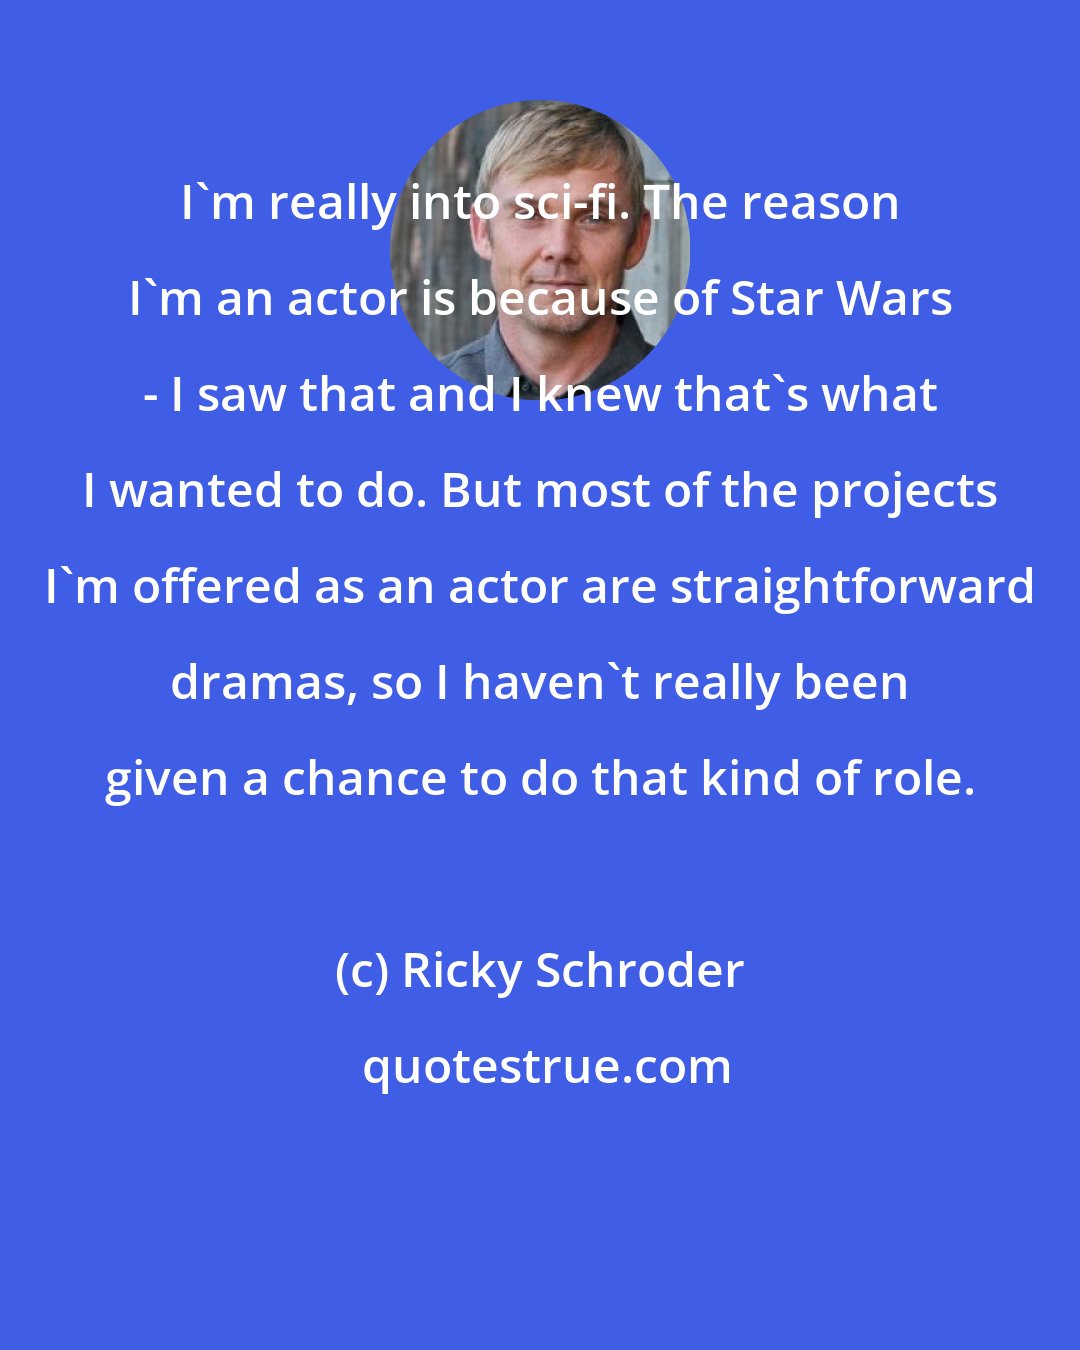 Ricky Schroder: I'm really into sci-fi. The reason I'm an actor is because of Star Wars - I saw that and I knew that's what I wanted to do. But most of the projects I'm offered as an actor are straightforward dramas, so I haven't really been given a chance to do that kind of role.